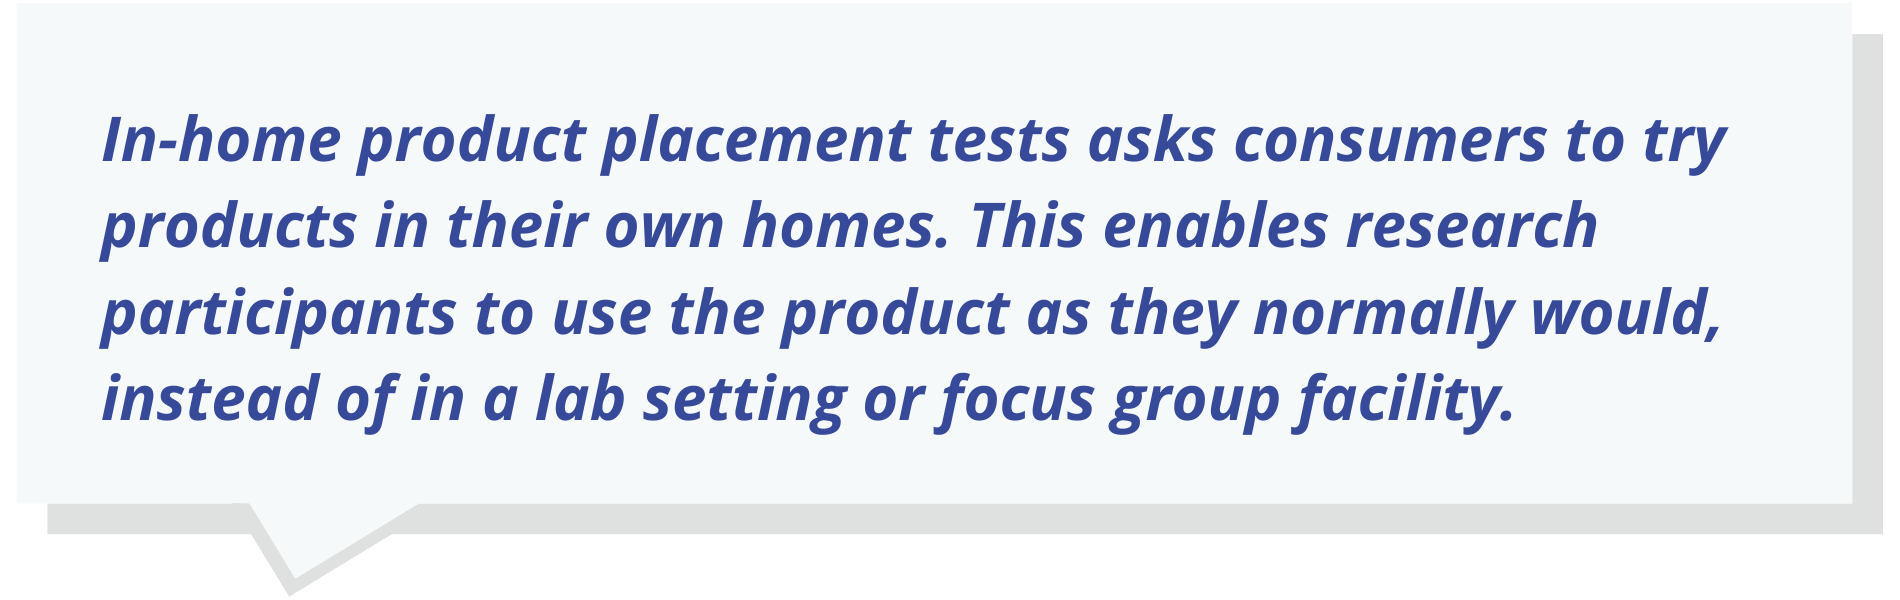 In-home product placement tests asks consumers to try products in their own homes. This enables research participants to use the product as they normally would, instead of in a lab setting or focus group facility.